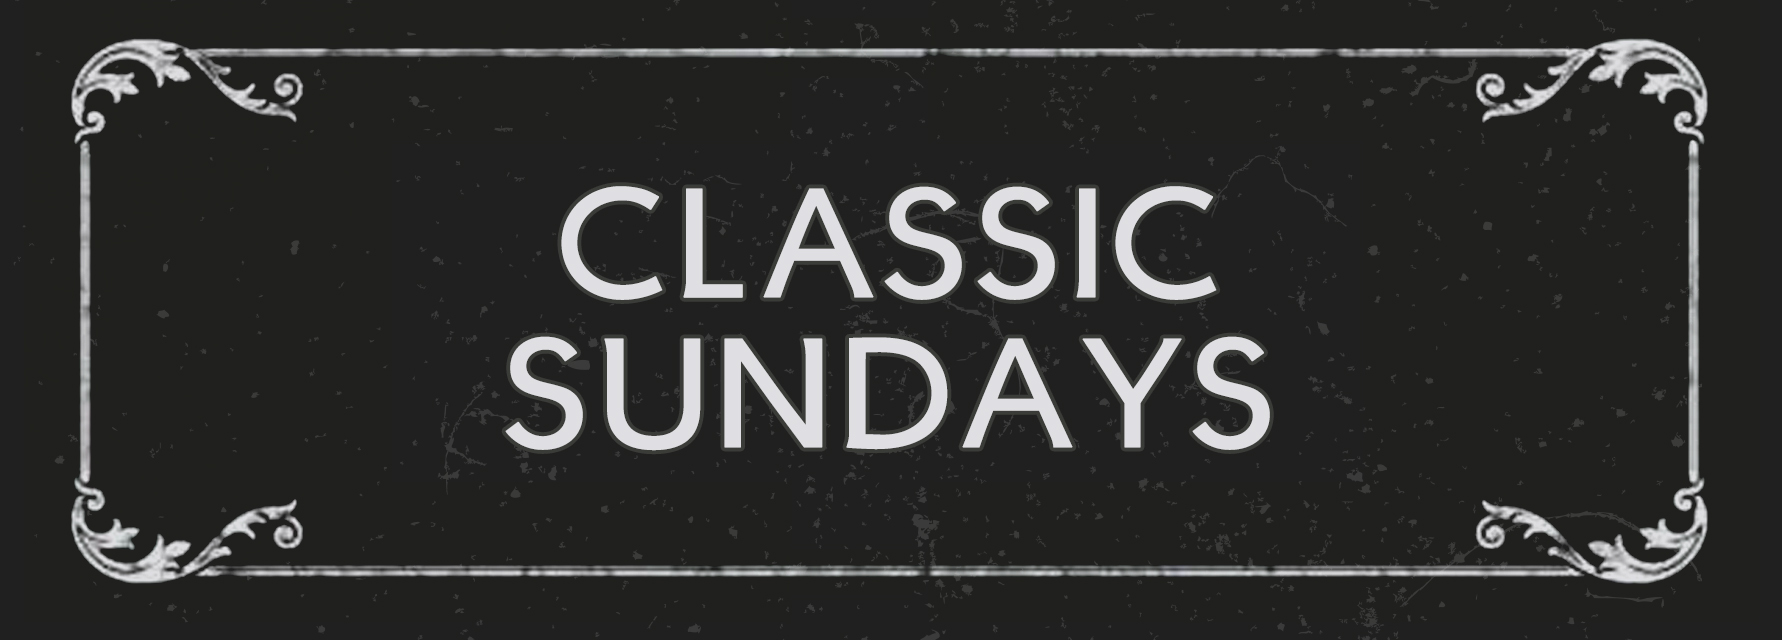 Classic Sundays logo - old style writing from early 20th century